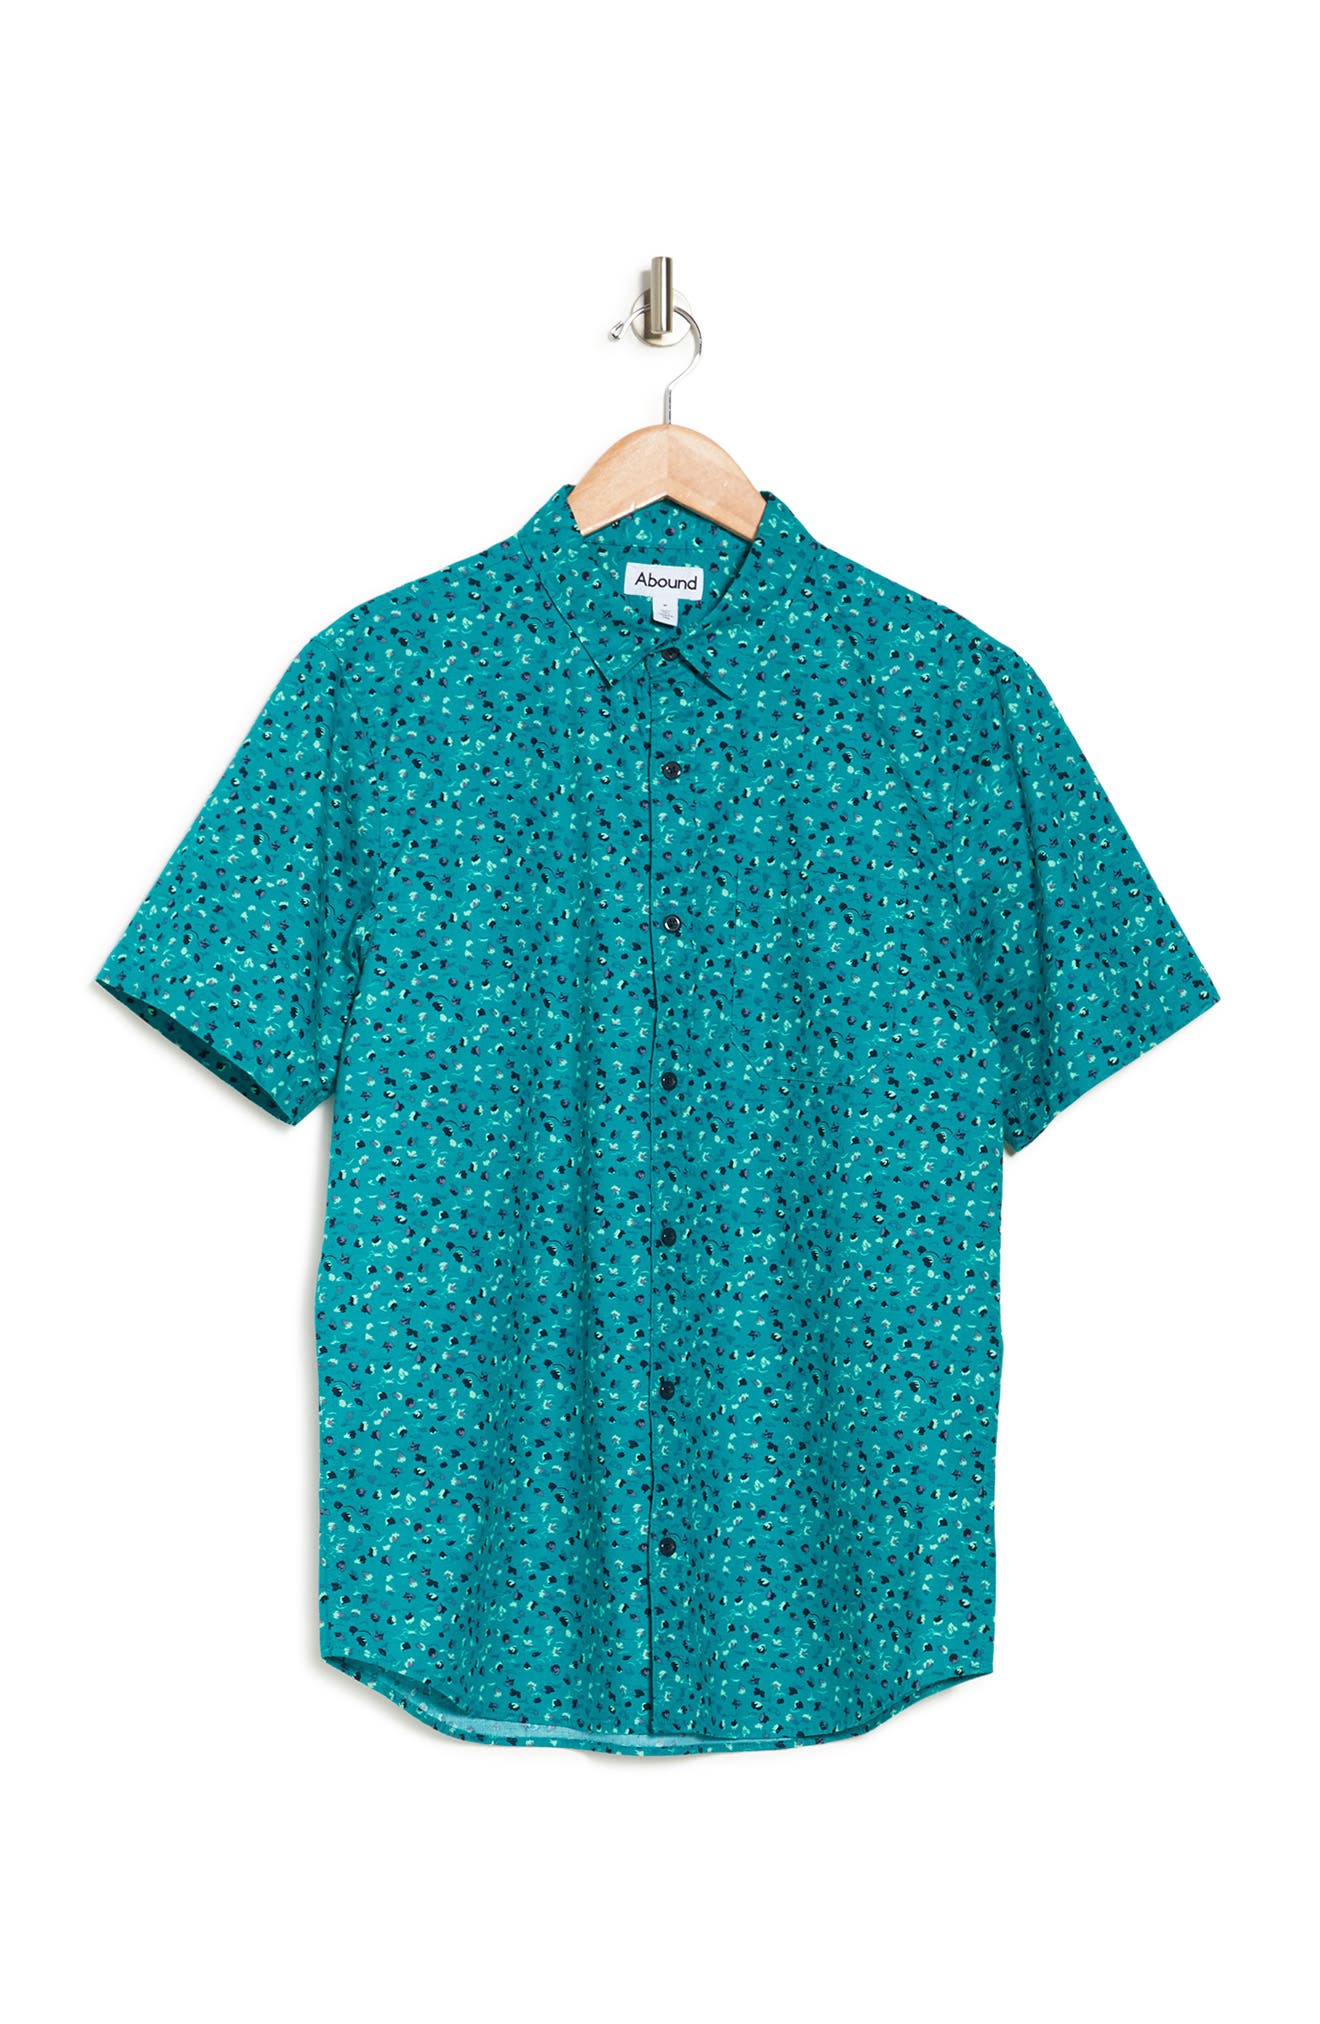 Abound Mini Print Regular Fit Shirt In Teal Compass Flowers